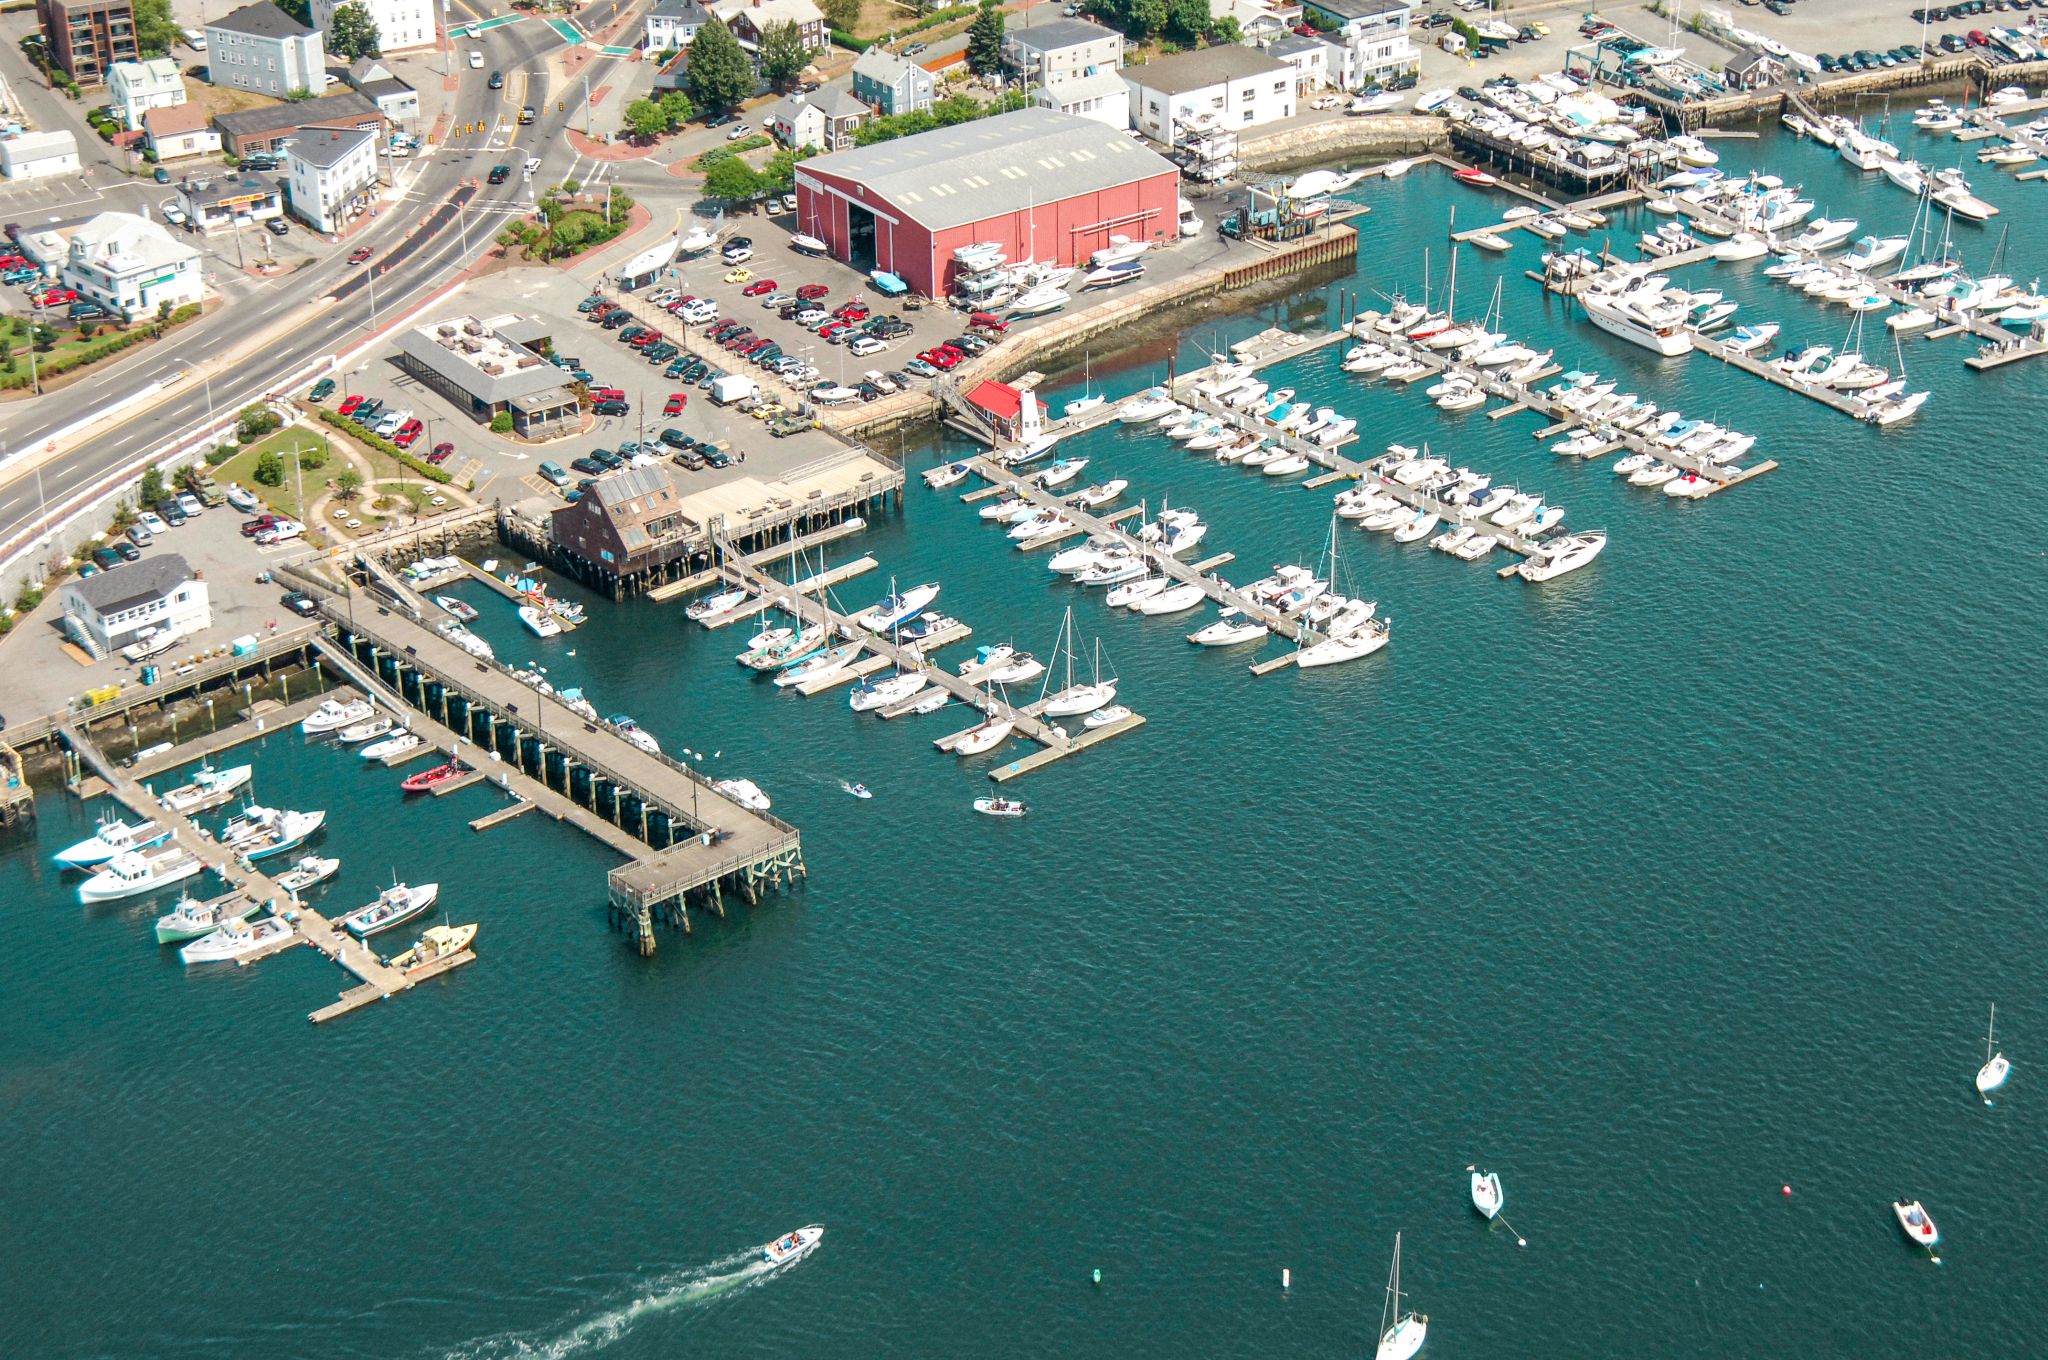 Glover Wharf Marina expands its smart ecosystem with wireless electrical metering sensors